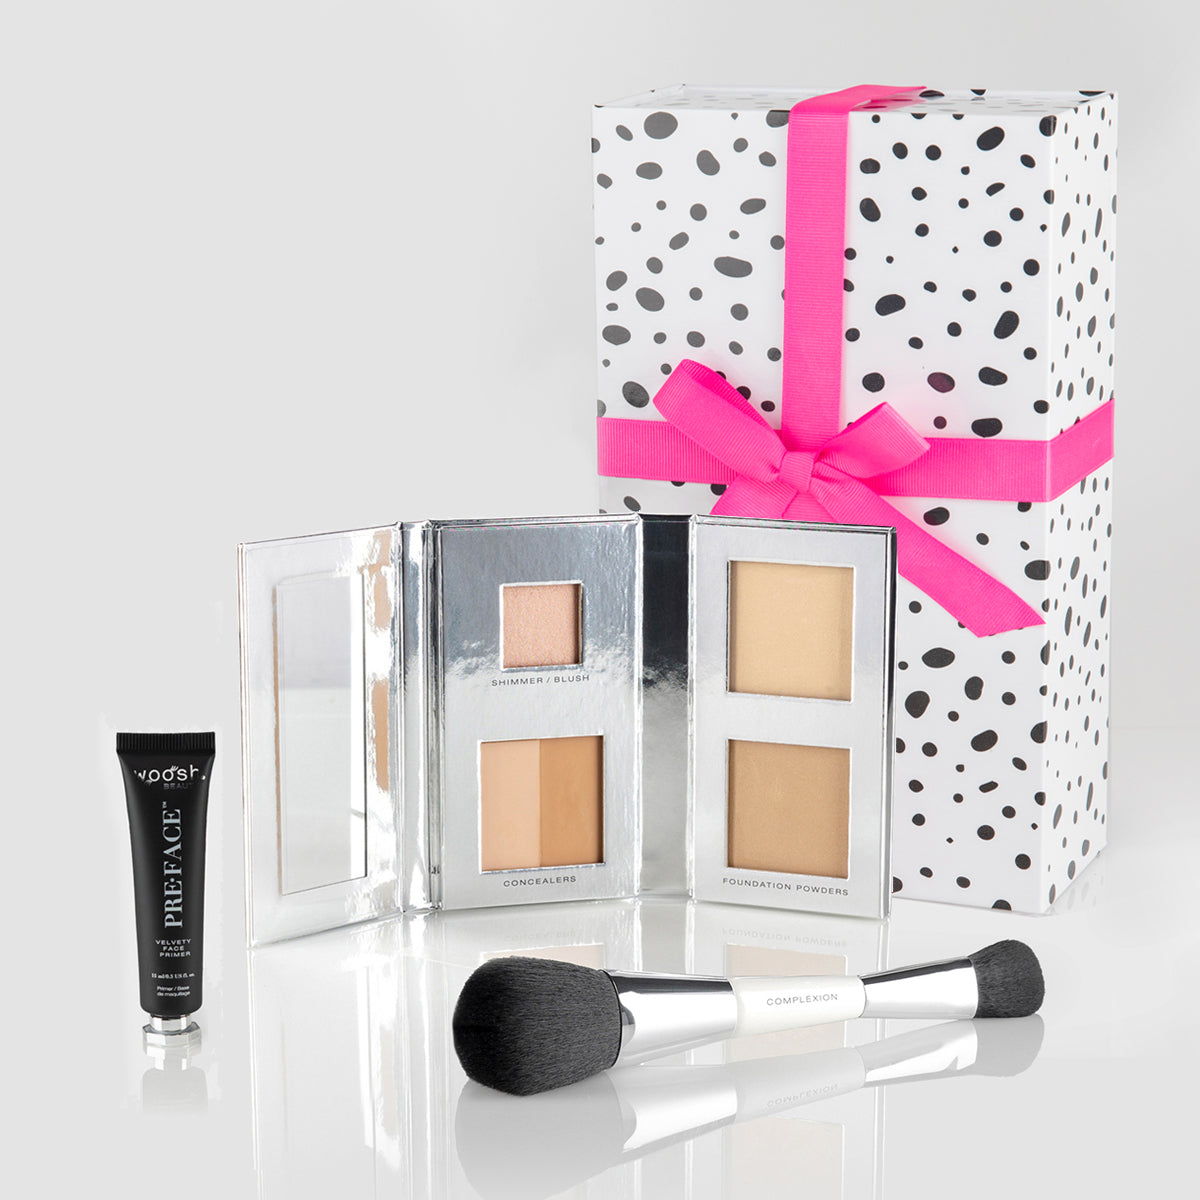 The Complexion Kit Holiday Bundle